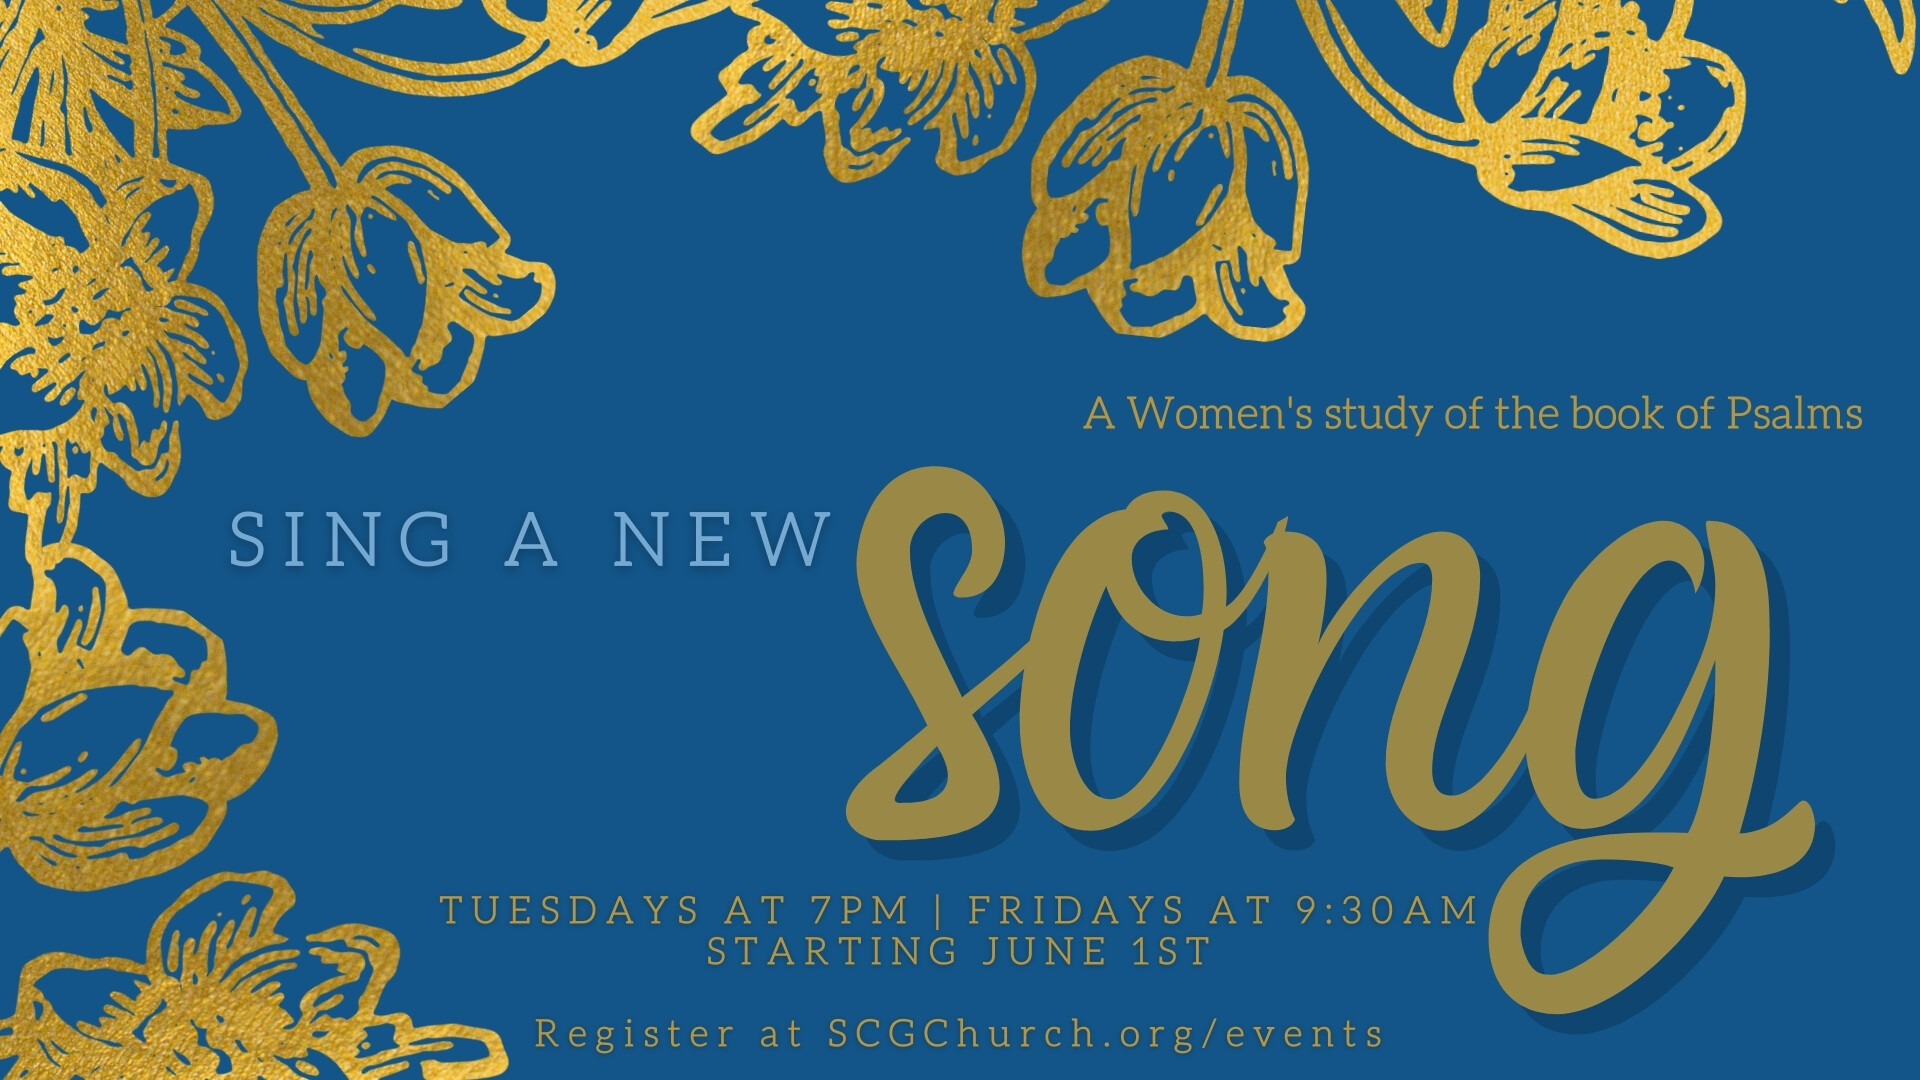 Sing a New Song: A Women's study of the book of Psalms